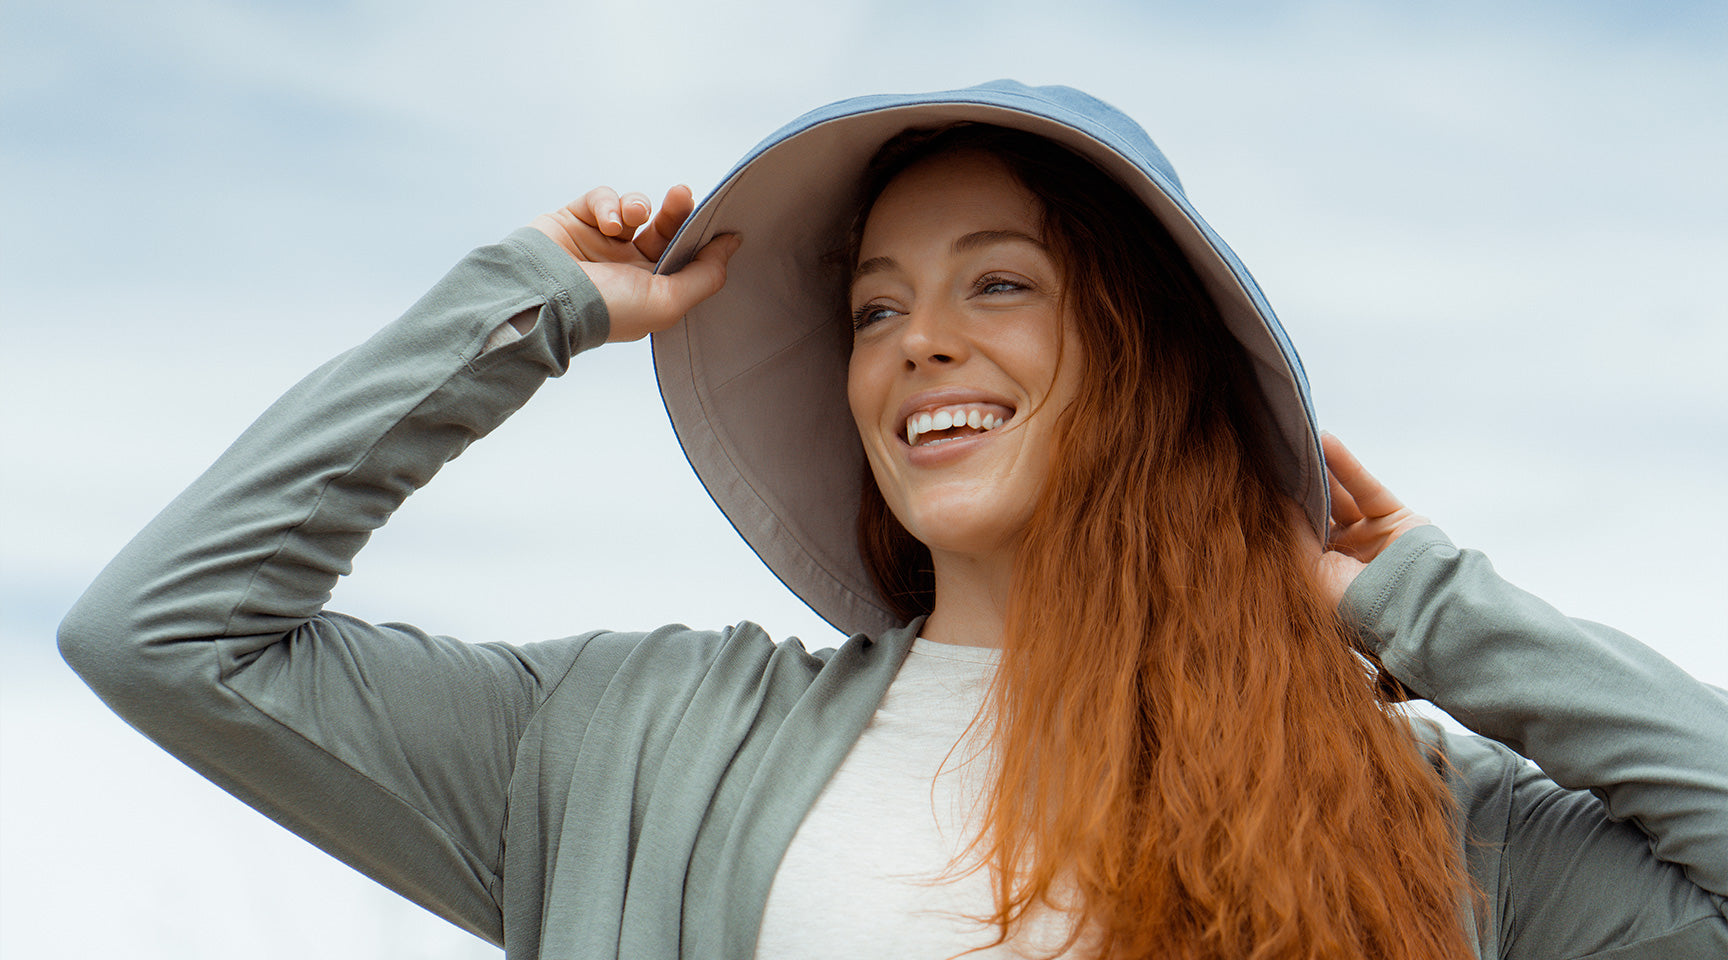 What makes the perfect sun hat for women?